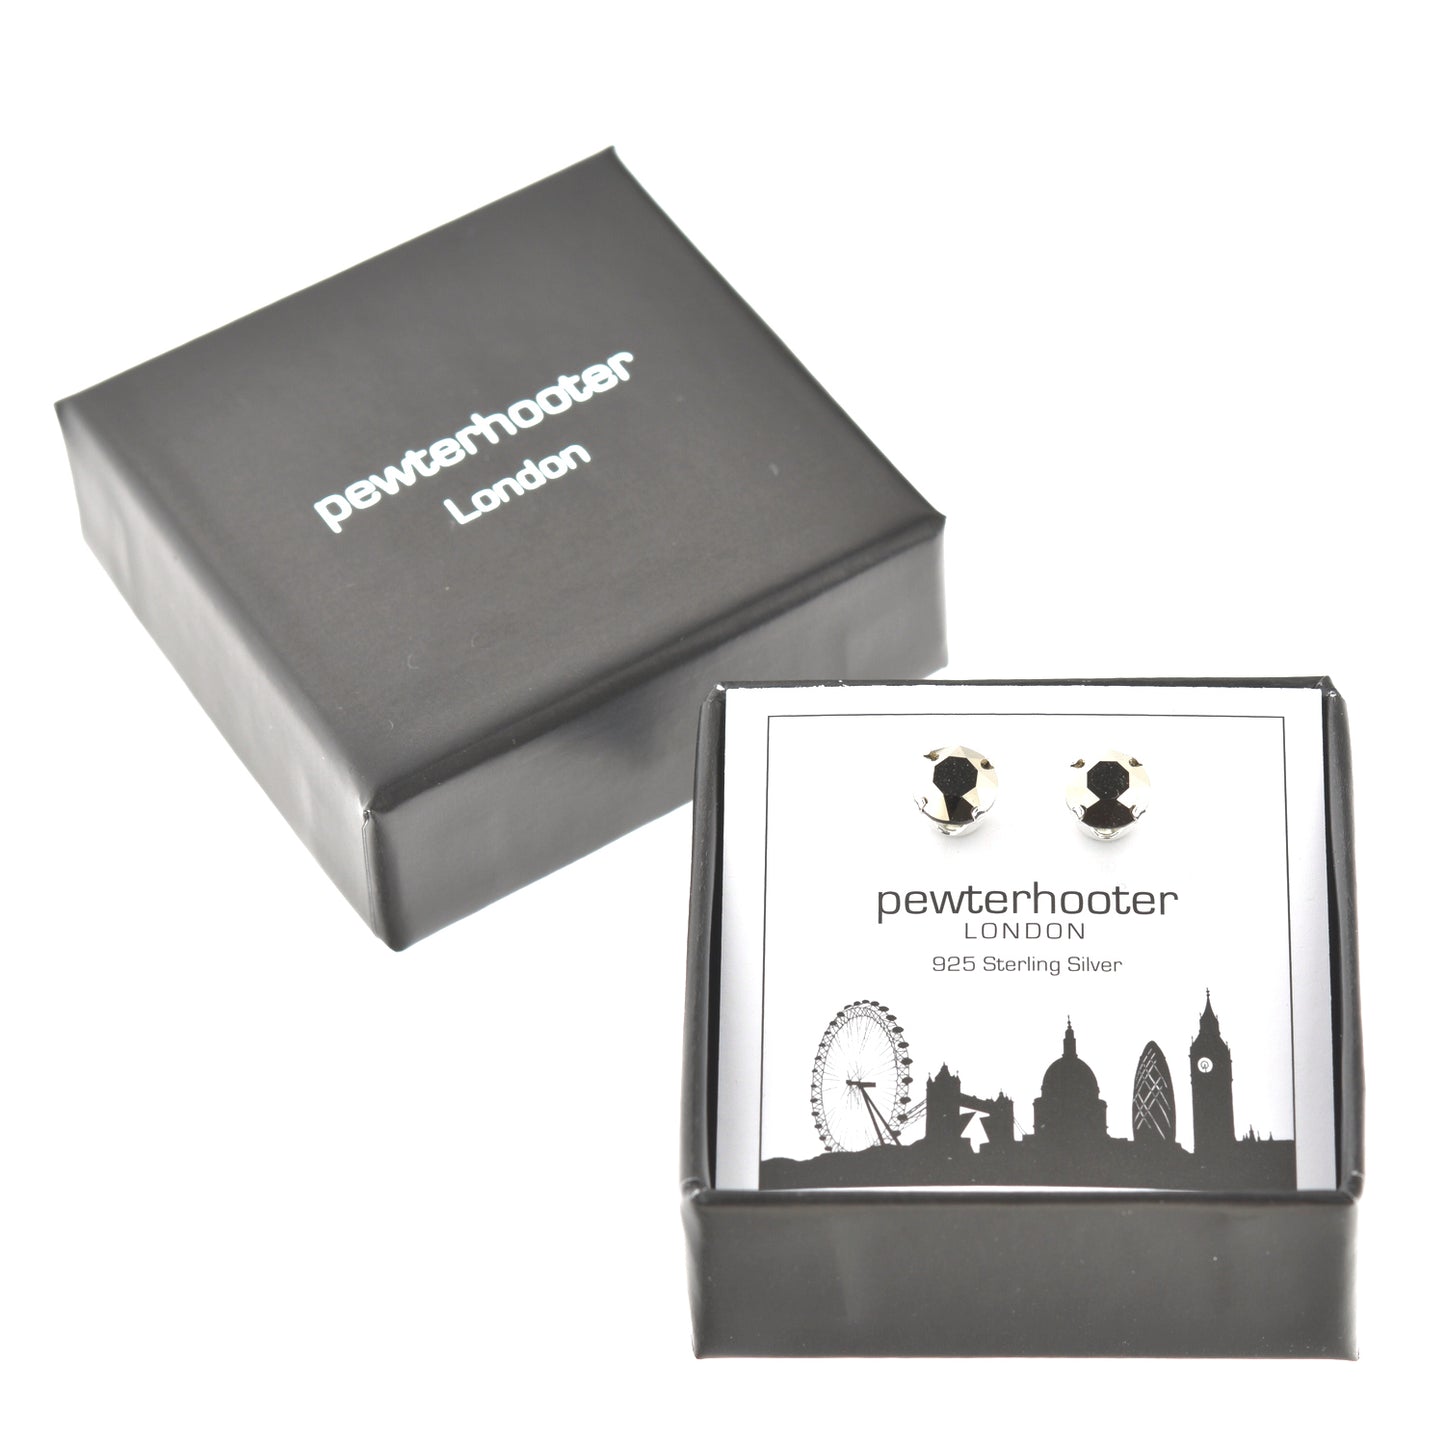 pewterhooter® Women's Classic Collection 925 Sterling silver earrings with sparkling Light Metallic Gold crystals, packaged in a gift box for any occasion.